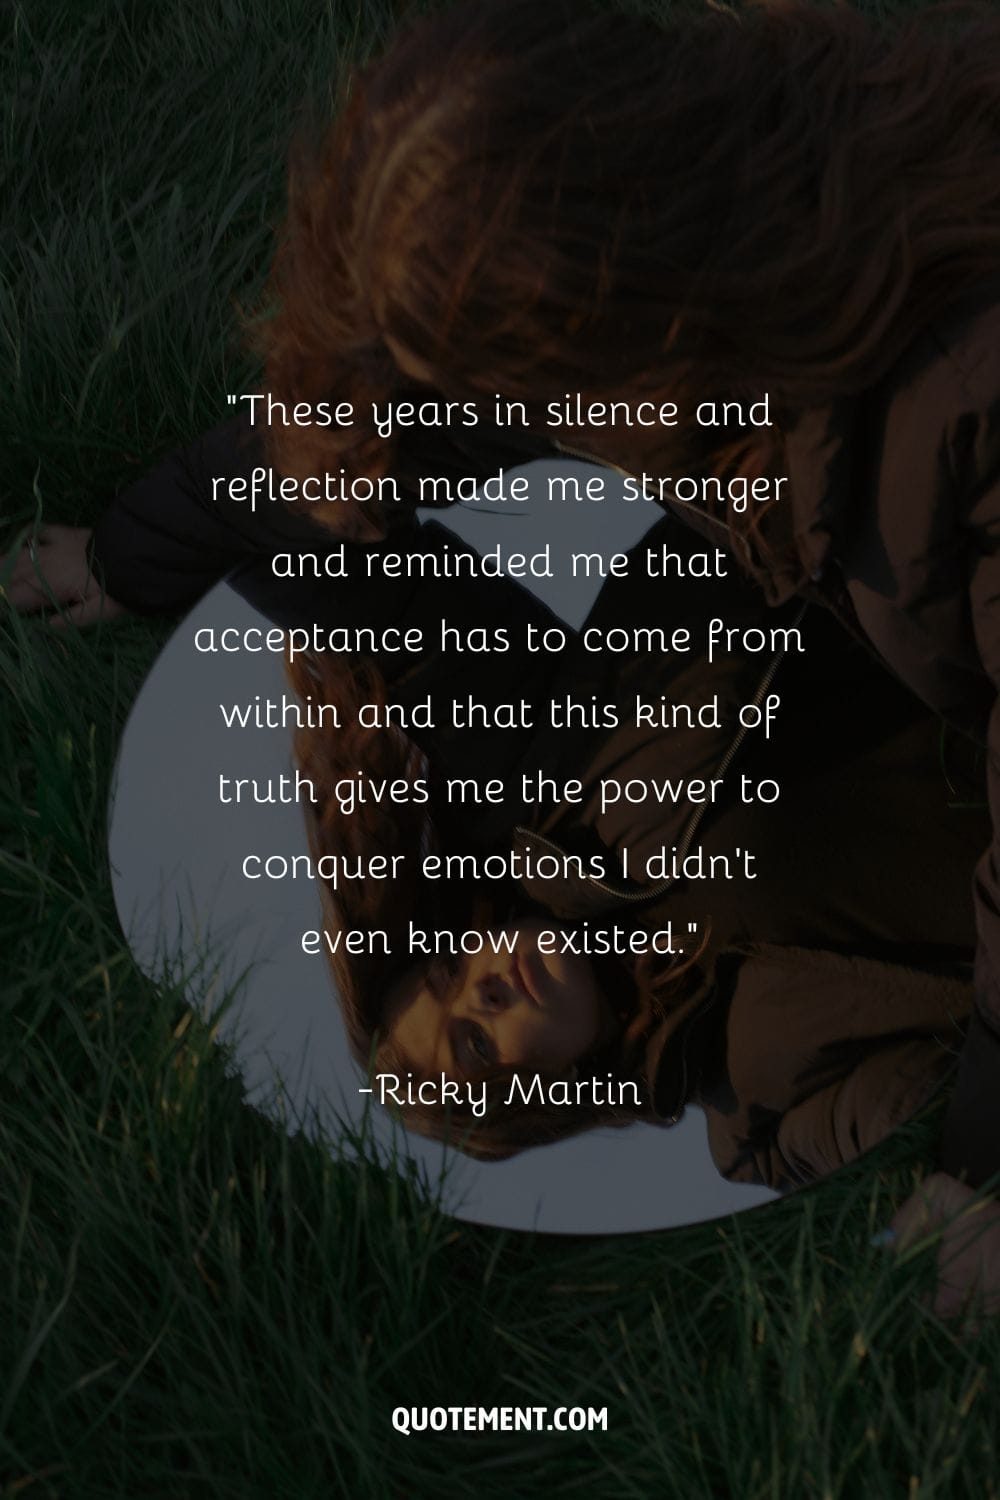 These years in silence and reflection made me stronger and reminded me that acceptance